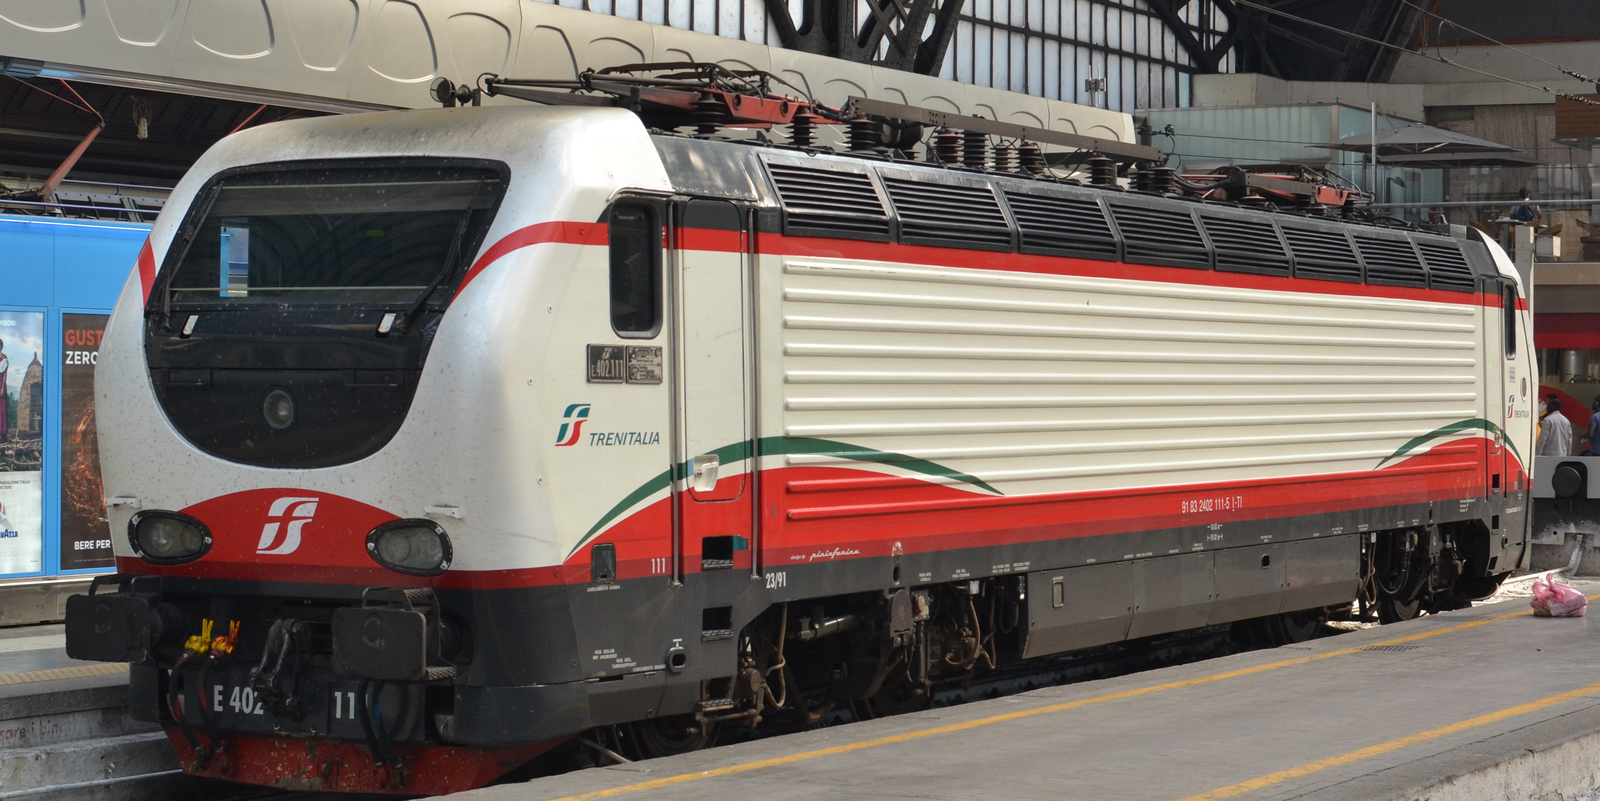 E.402.111 in August 2015 at Milano Centrale station